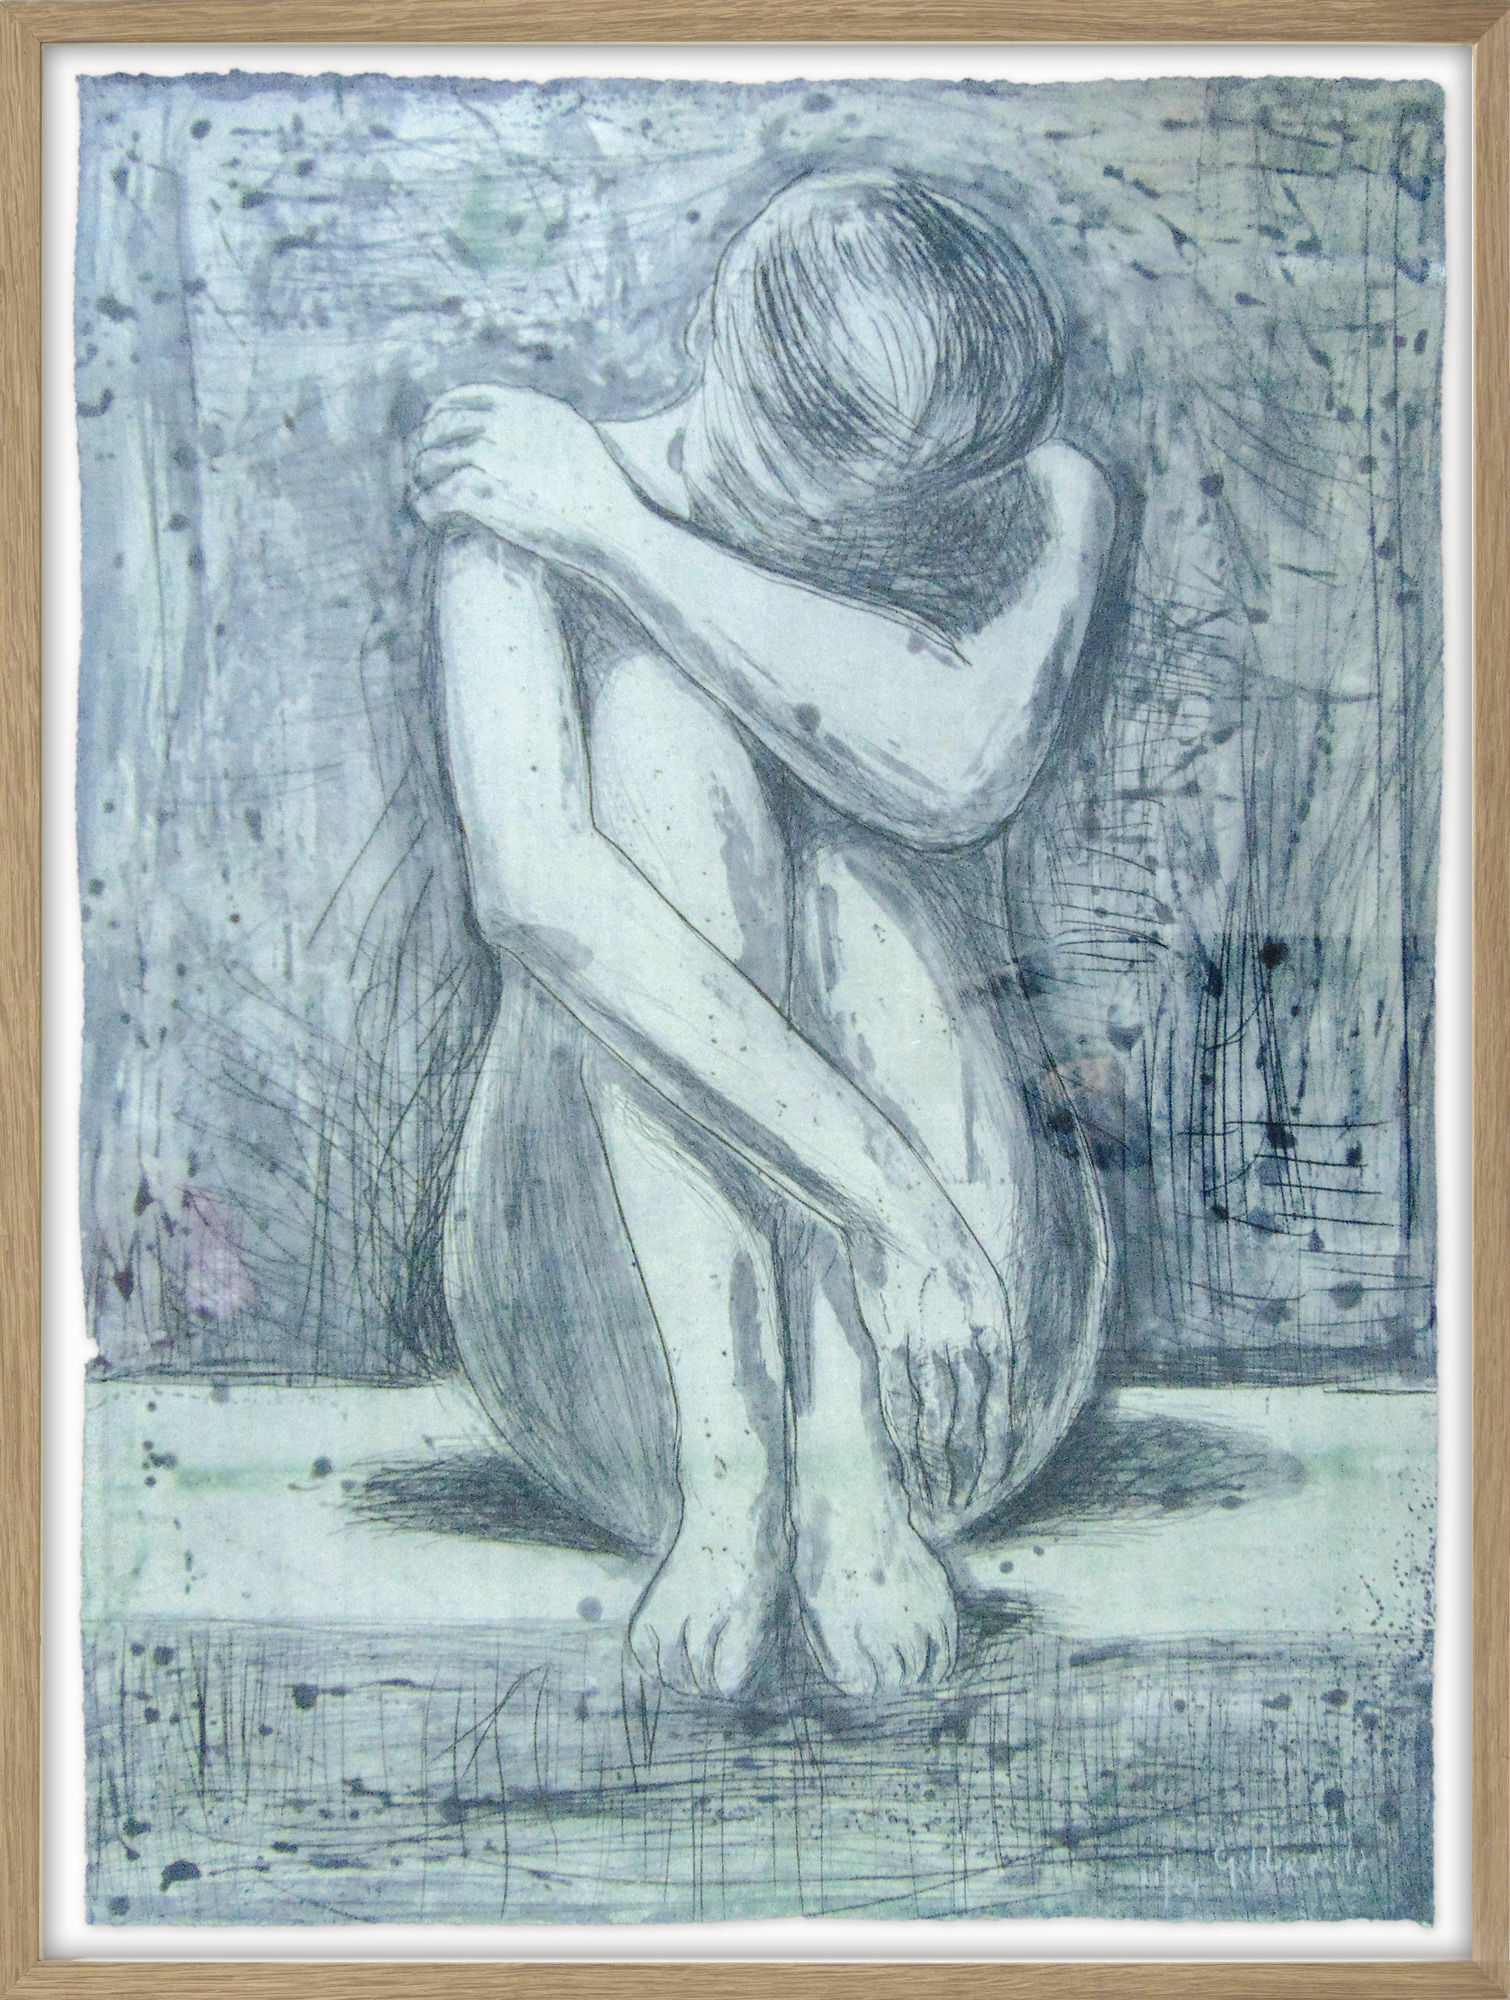 Picture "Seated Woman" (1996) by Jacob Gildor